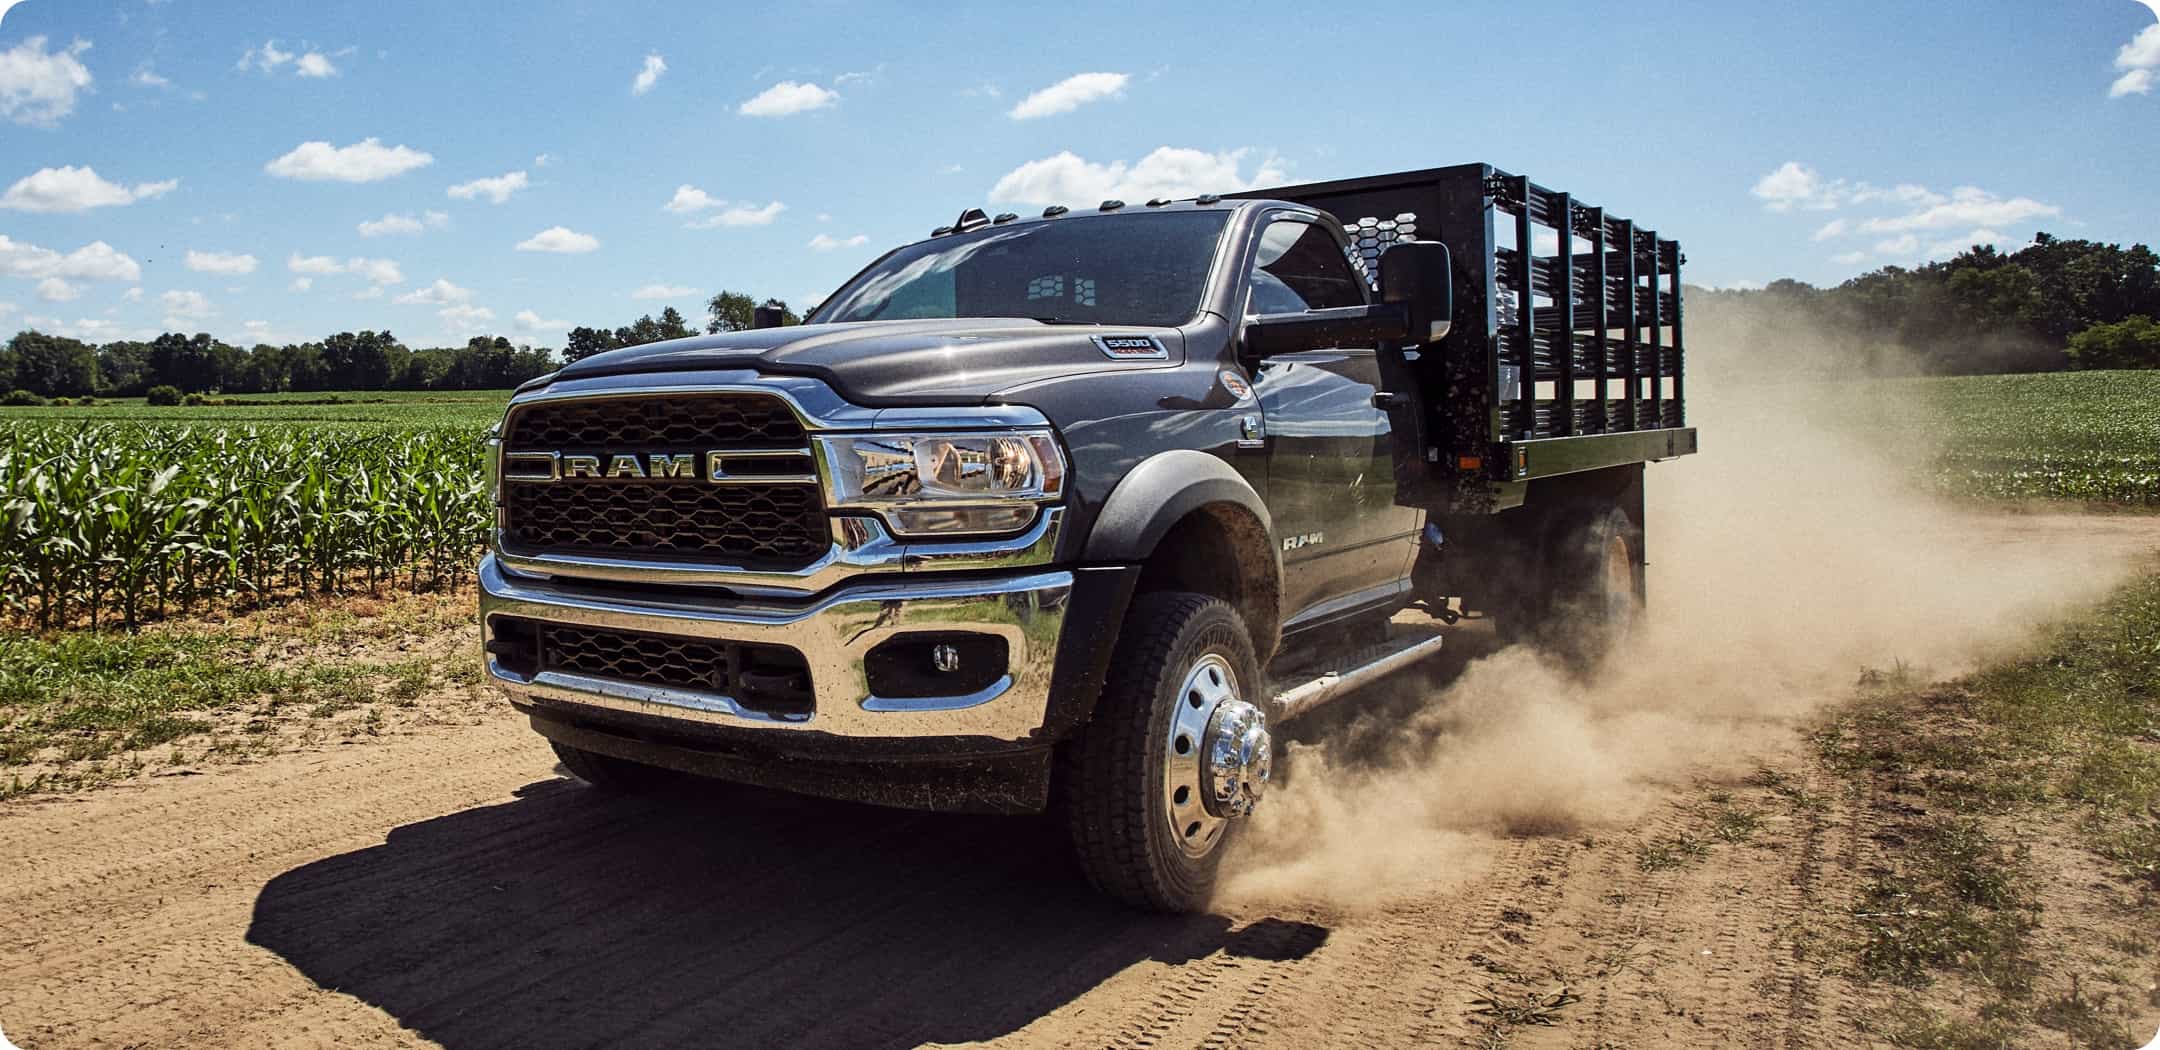 Display The 2021 Ram Chassis Cab with a cage upfit being driven on a dirt road.